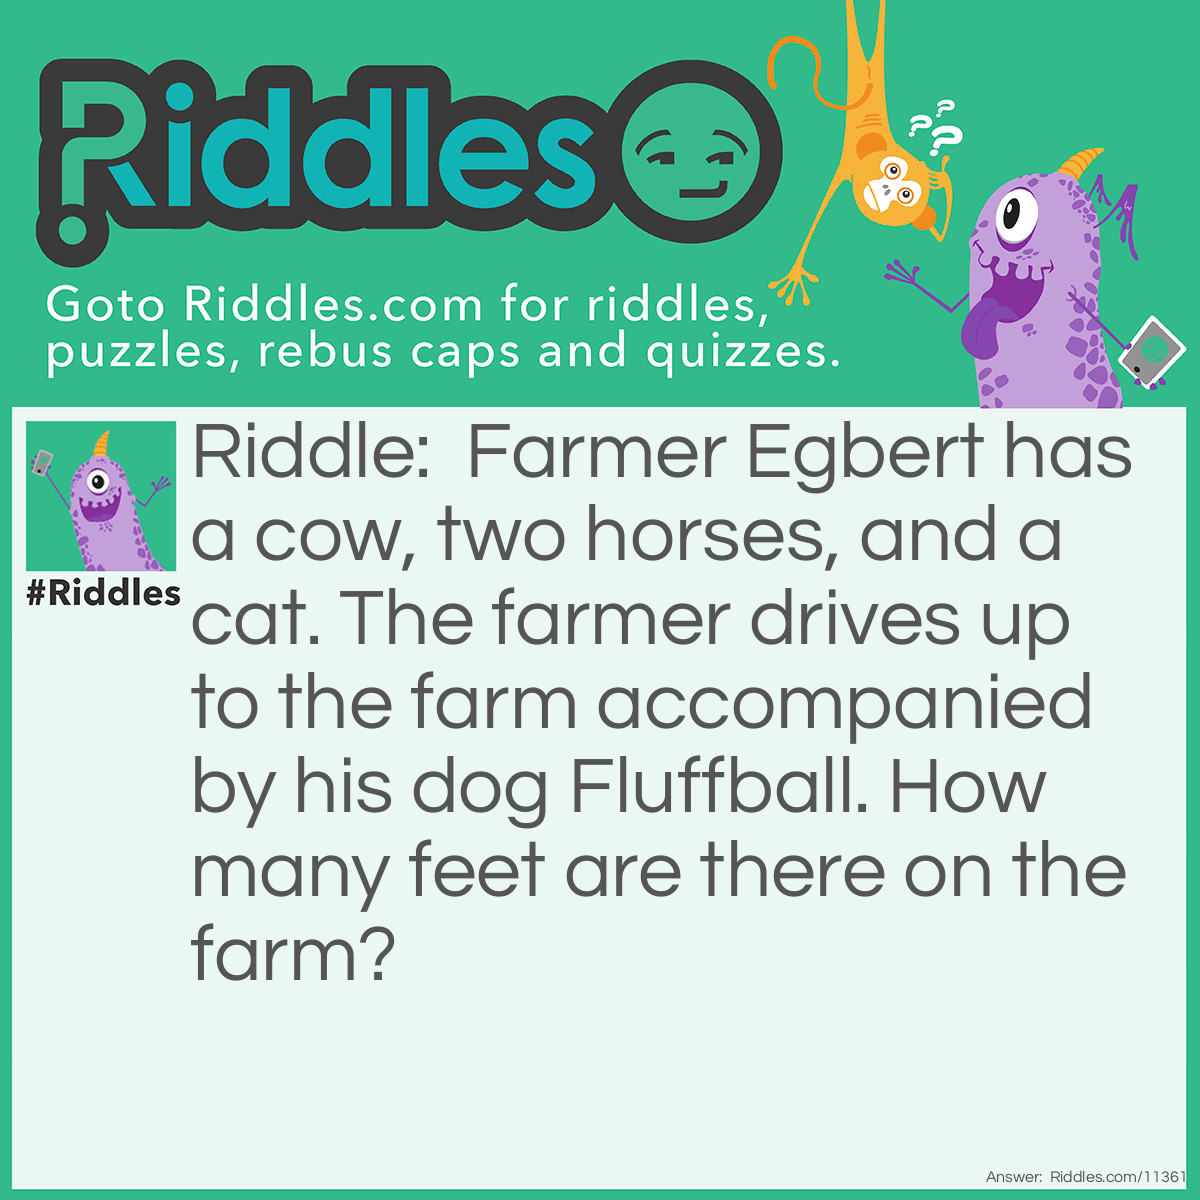 Riddle: Farmer Egbert has a cow, two horses, and a cat. The farmer drives up to the farm accompanied by his dog Fluffball. How many feet are there on the farm? Answer: The task was to count the number of FEET, so the correct answer is just two. Cows and horses have HOOVES; dogs and cats have PAWS; only Egbert, a human, has FEET.